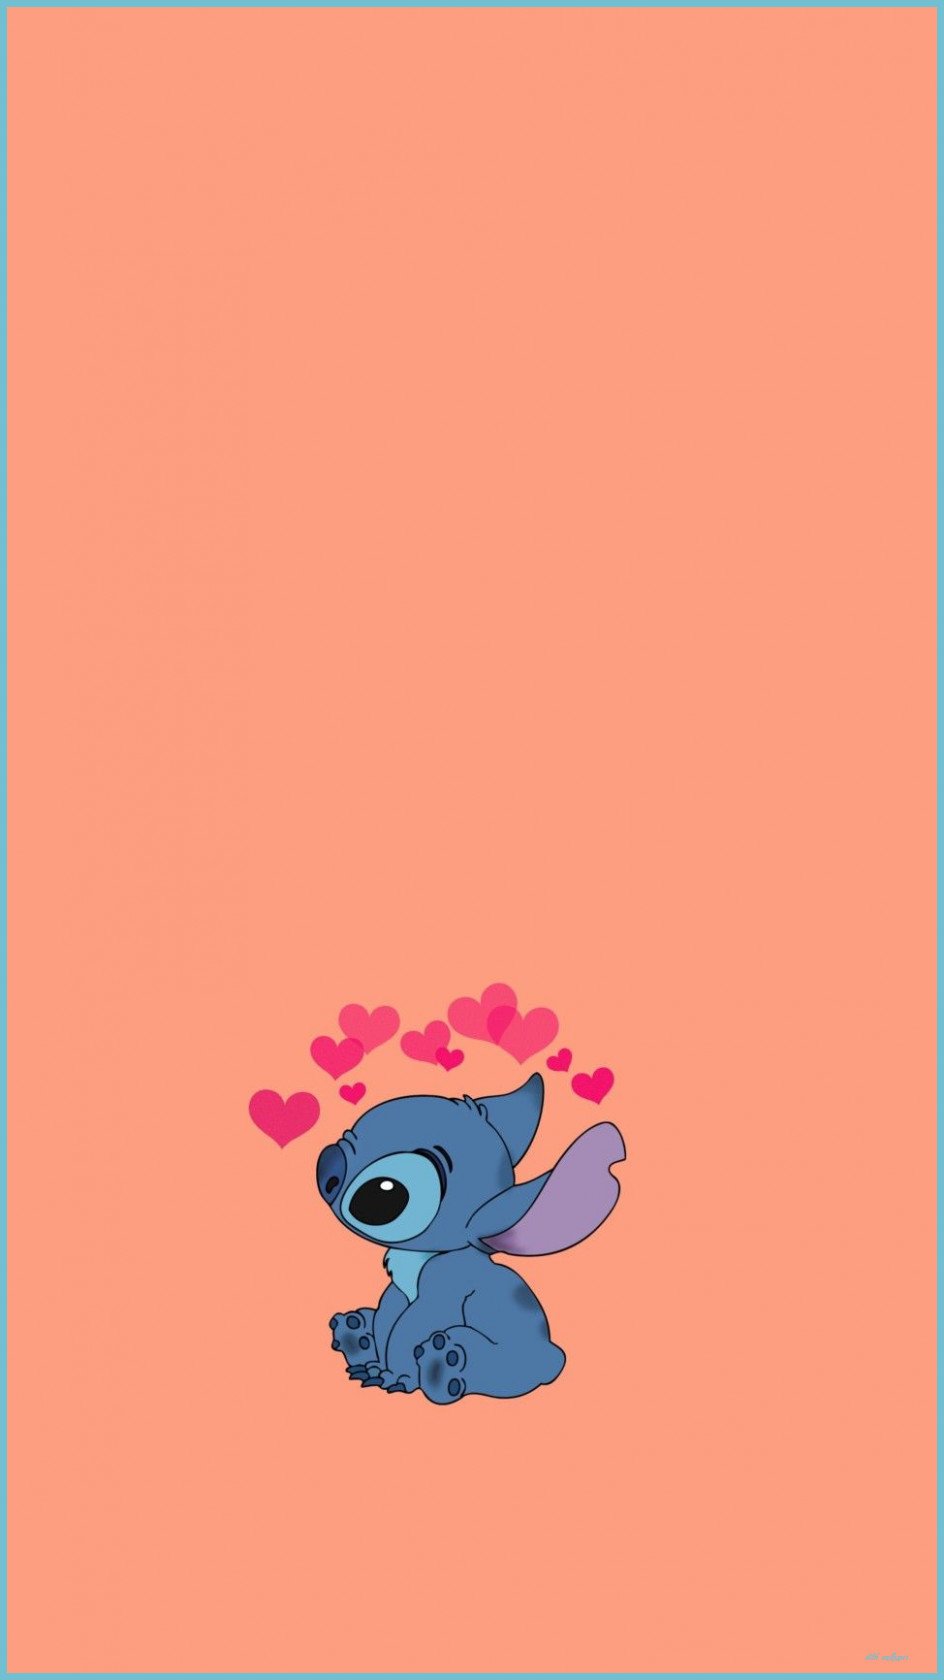 Lilo & Stitch wallpapers HD | Download Free backgrounds